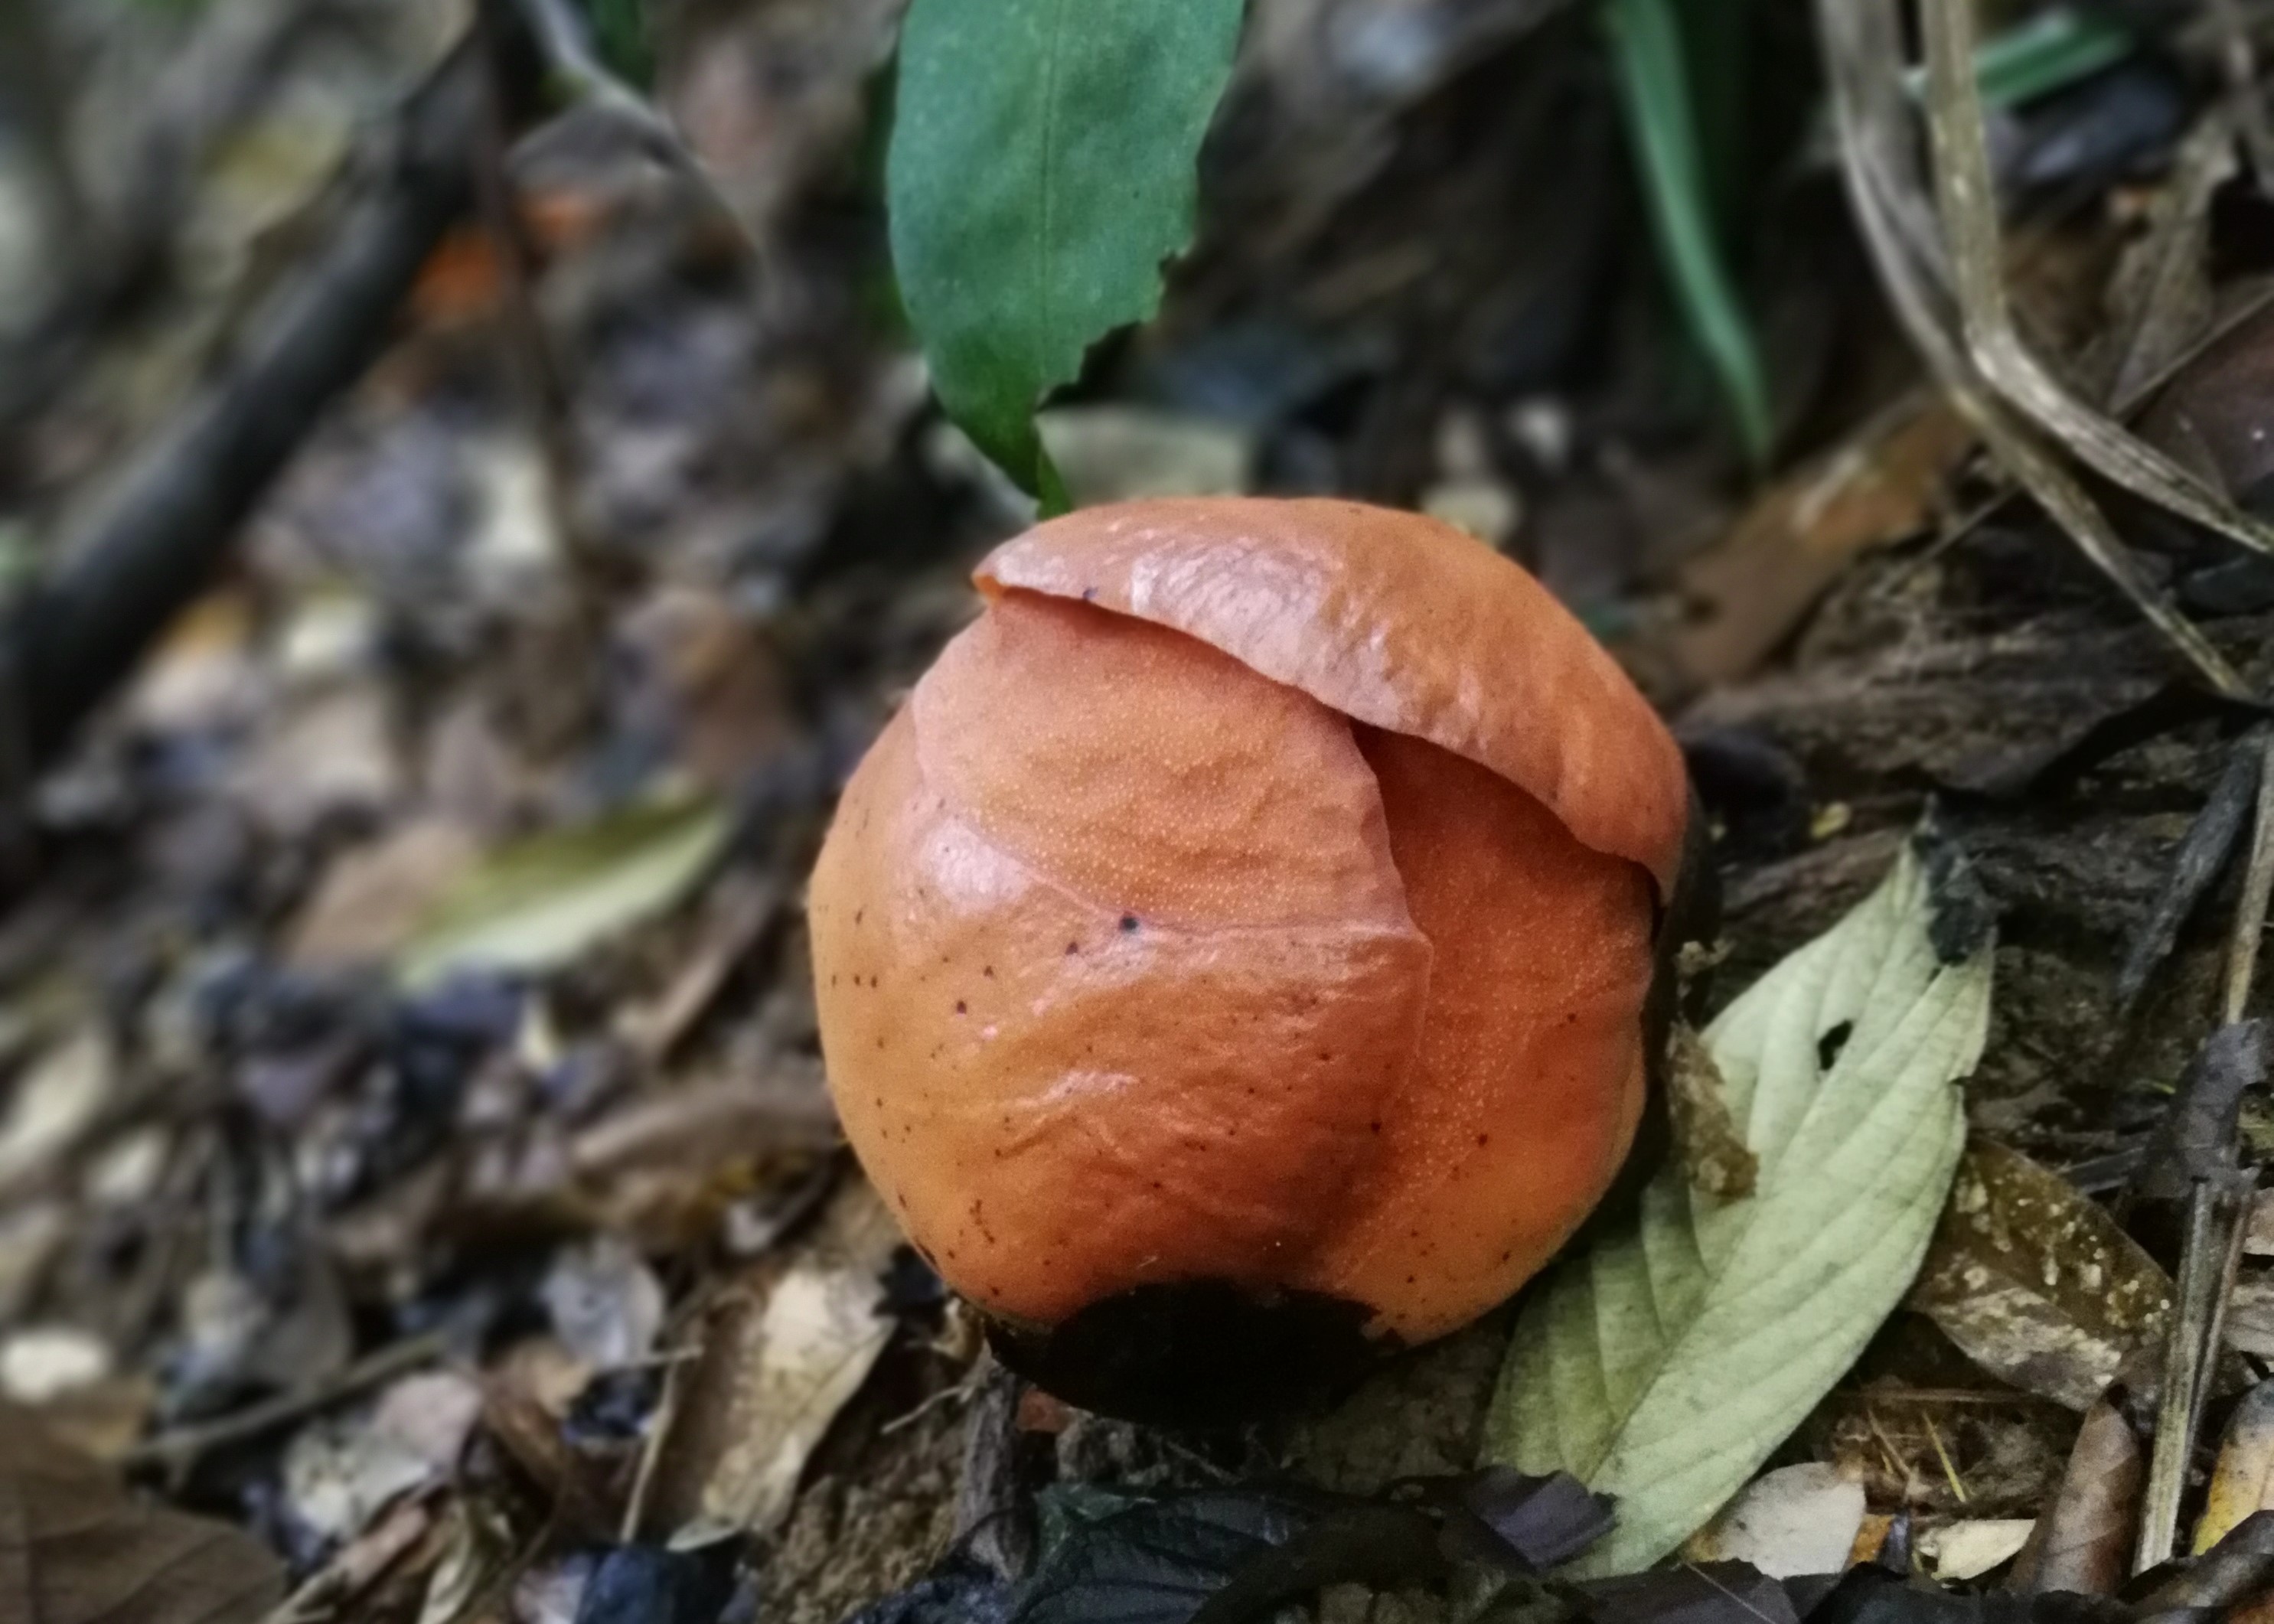 An rafflesia bud, which locals are careful not to disturb. Not all travellers see them in bloom and some make several trips before they get lucky.